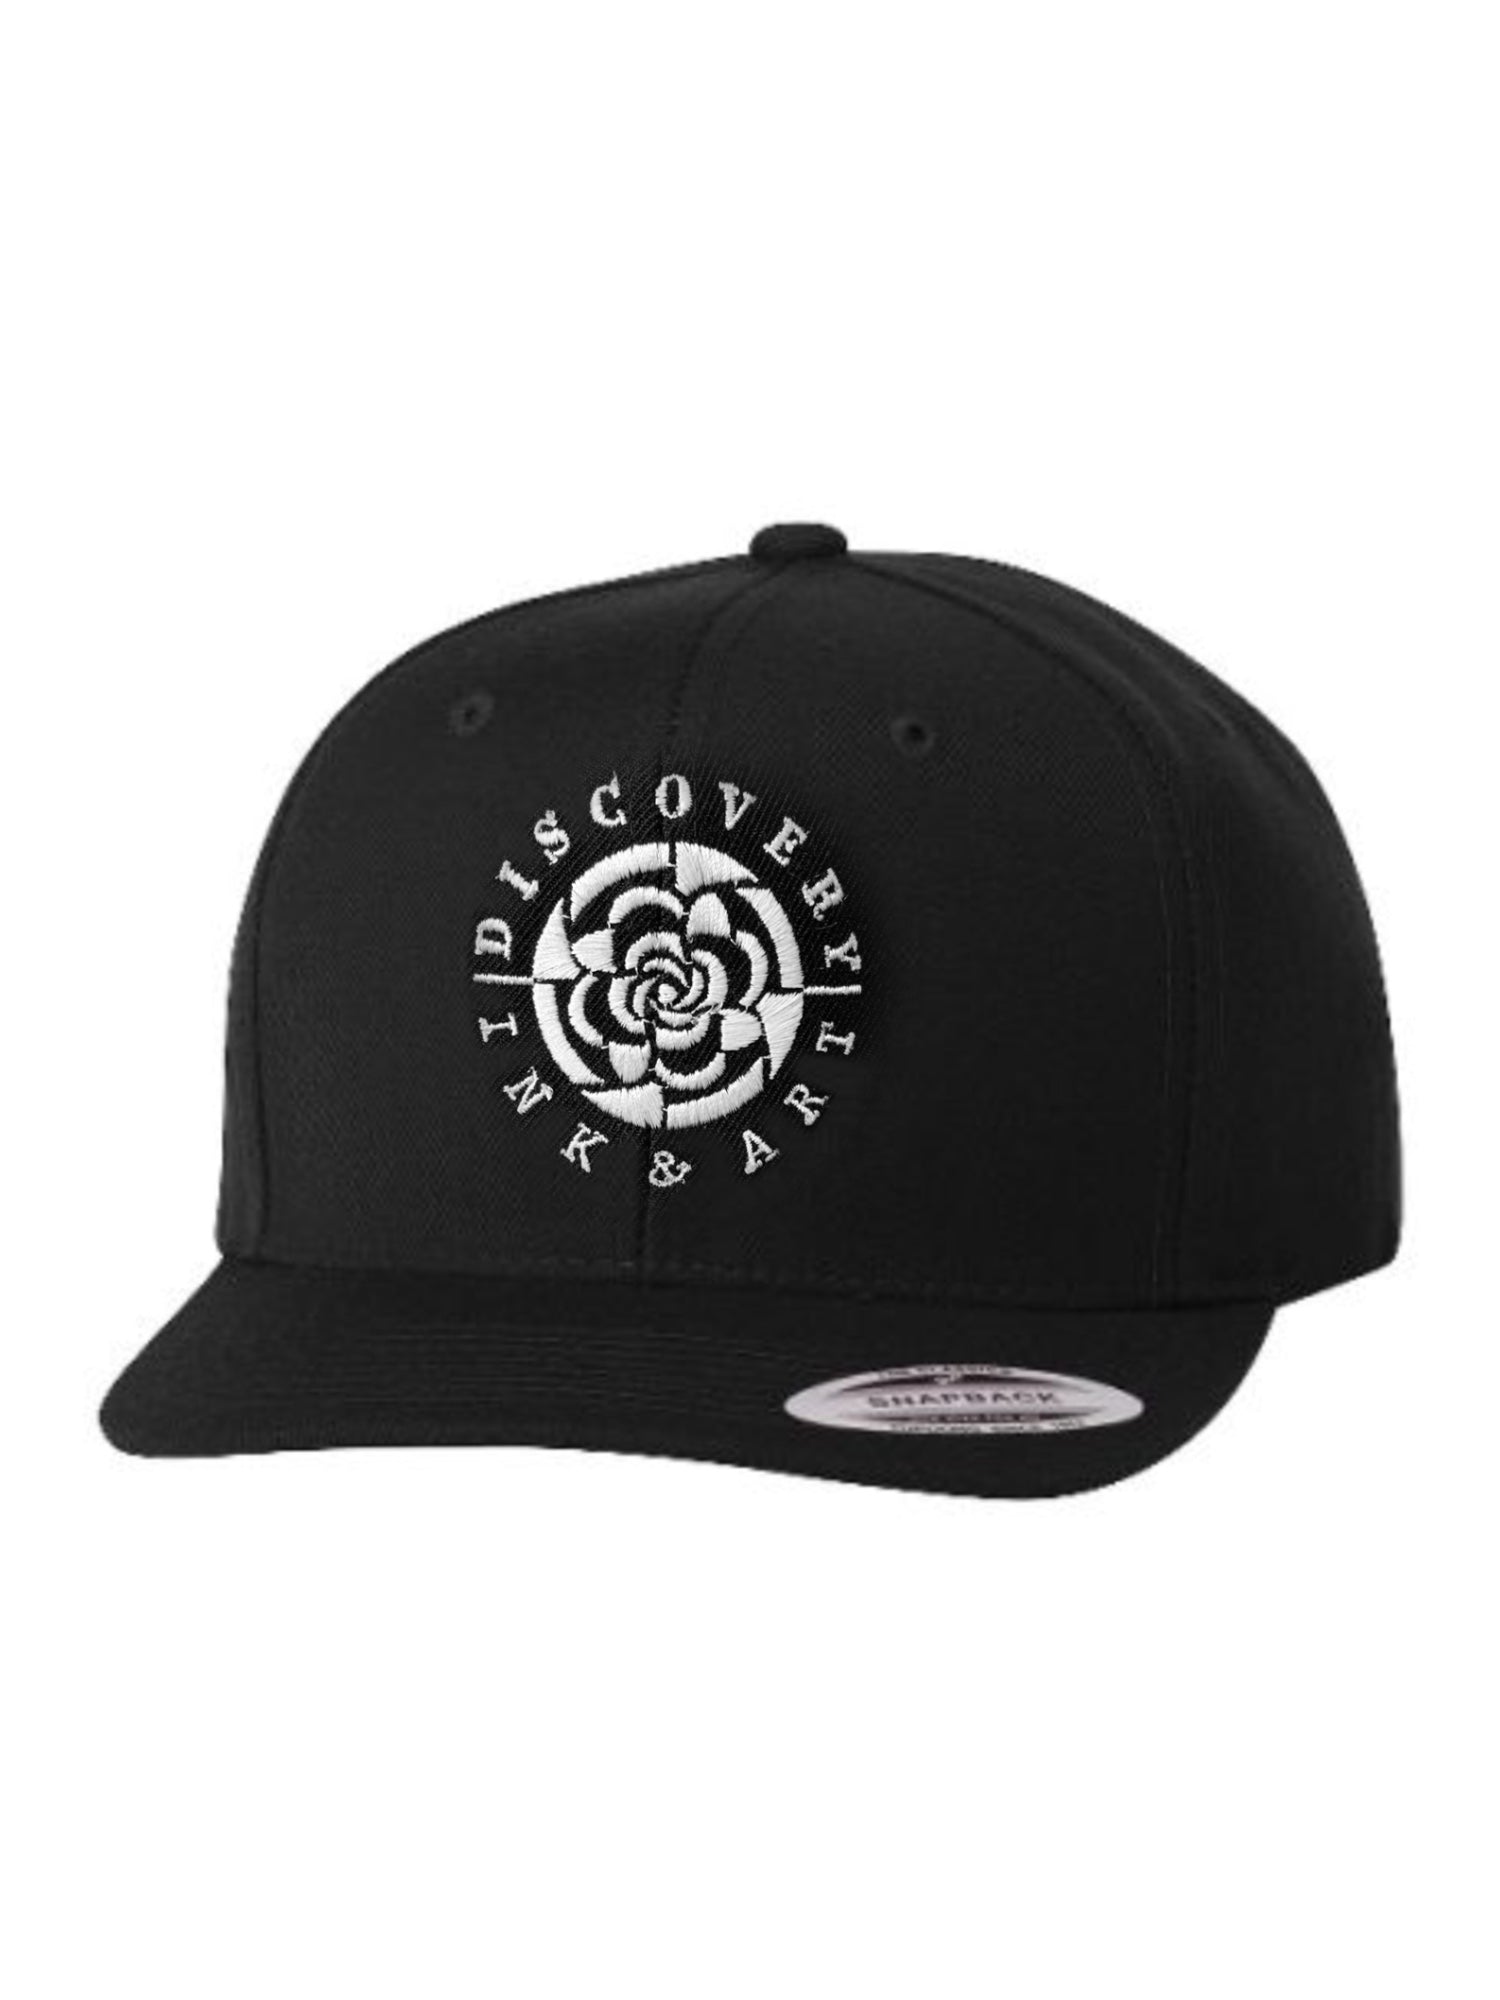 Black snapback hat with the words Discovery Ink & Art circled around a mandala-inspired logo